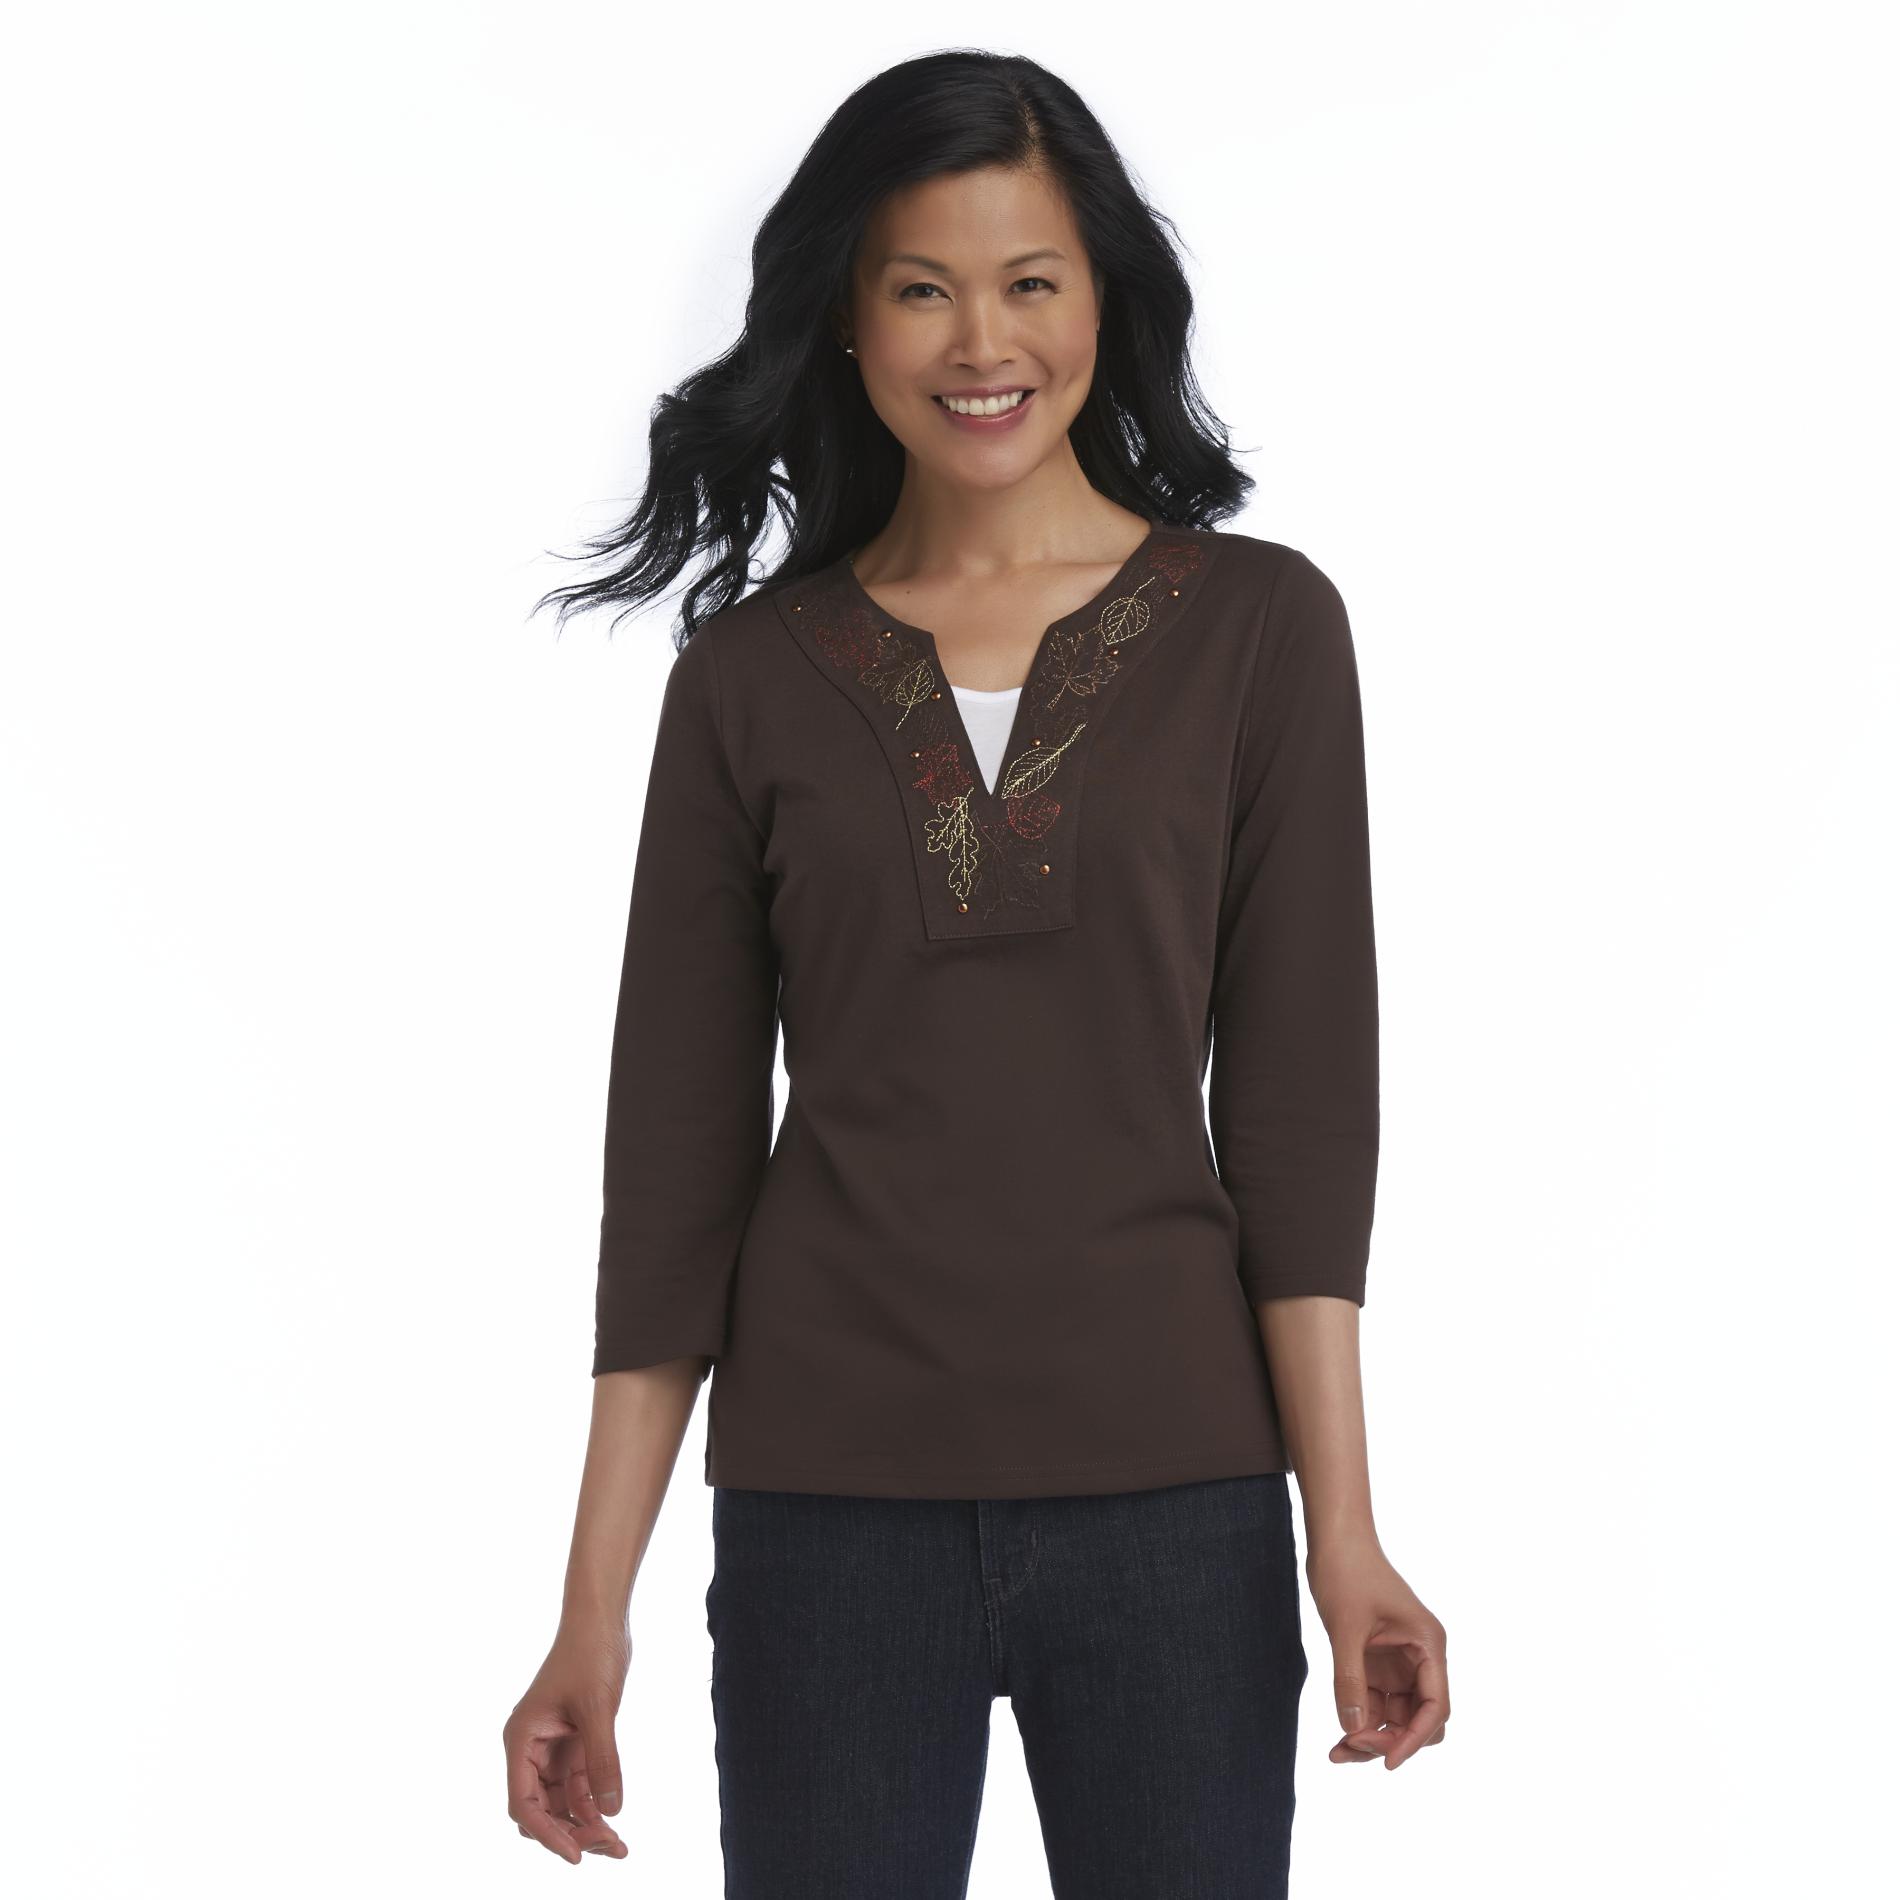 Basic Editions Women's Embroidered Harvest Knit Top